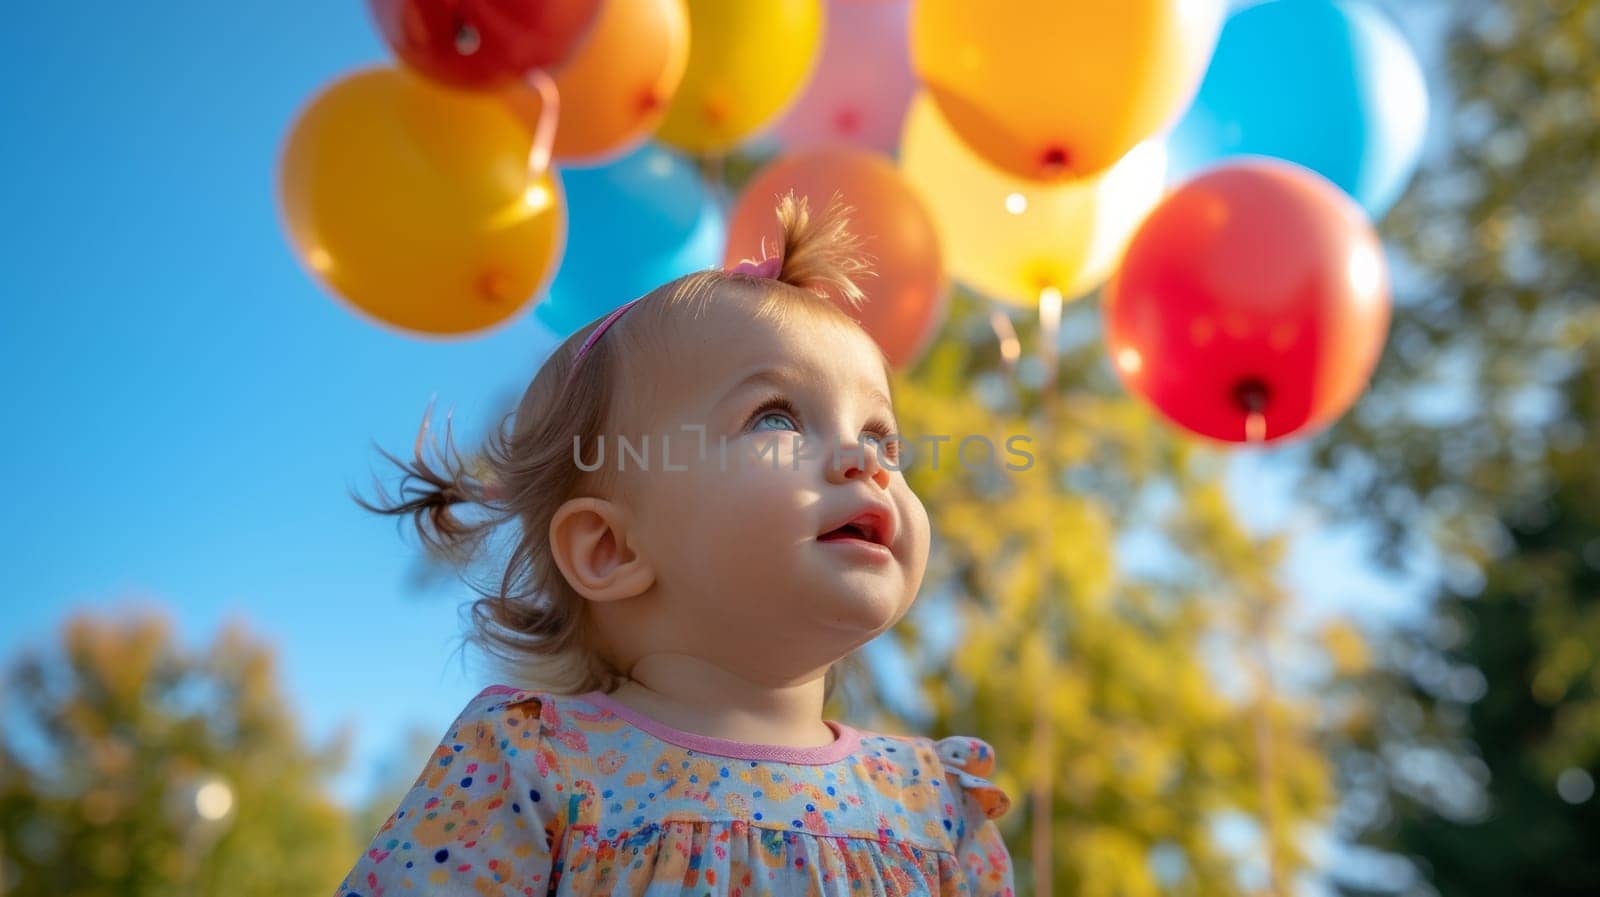 A baby girl with a flower in her hair standing under balloons